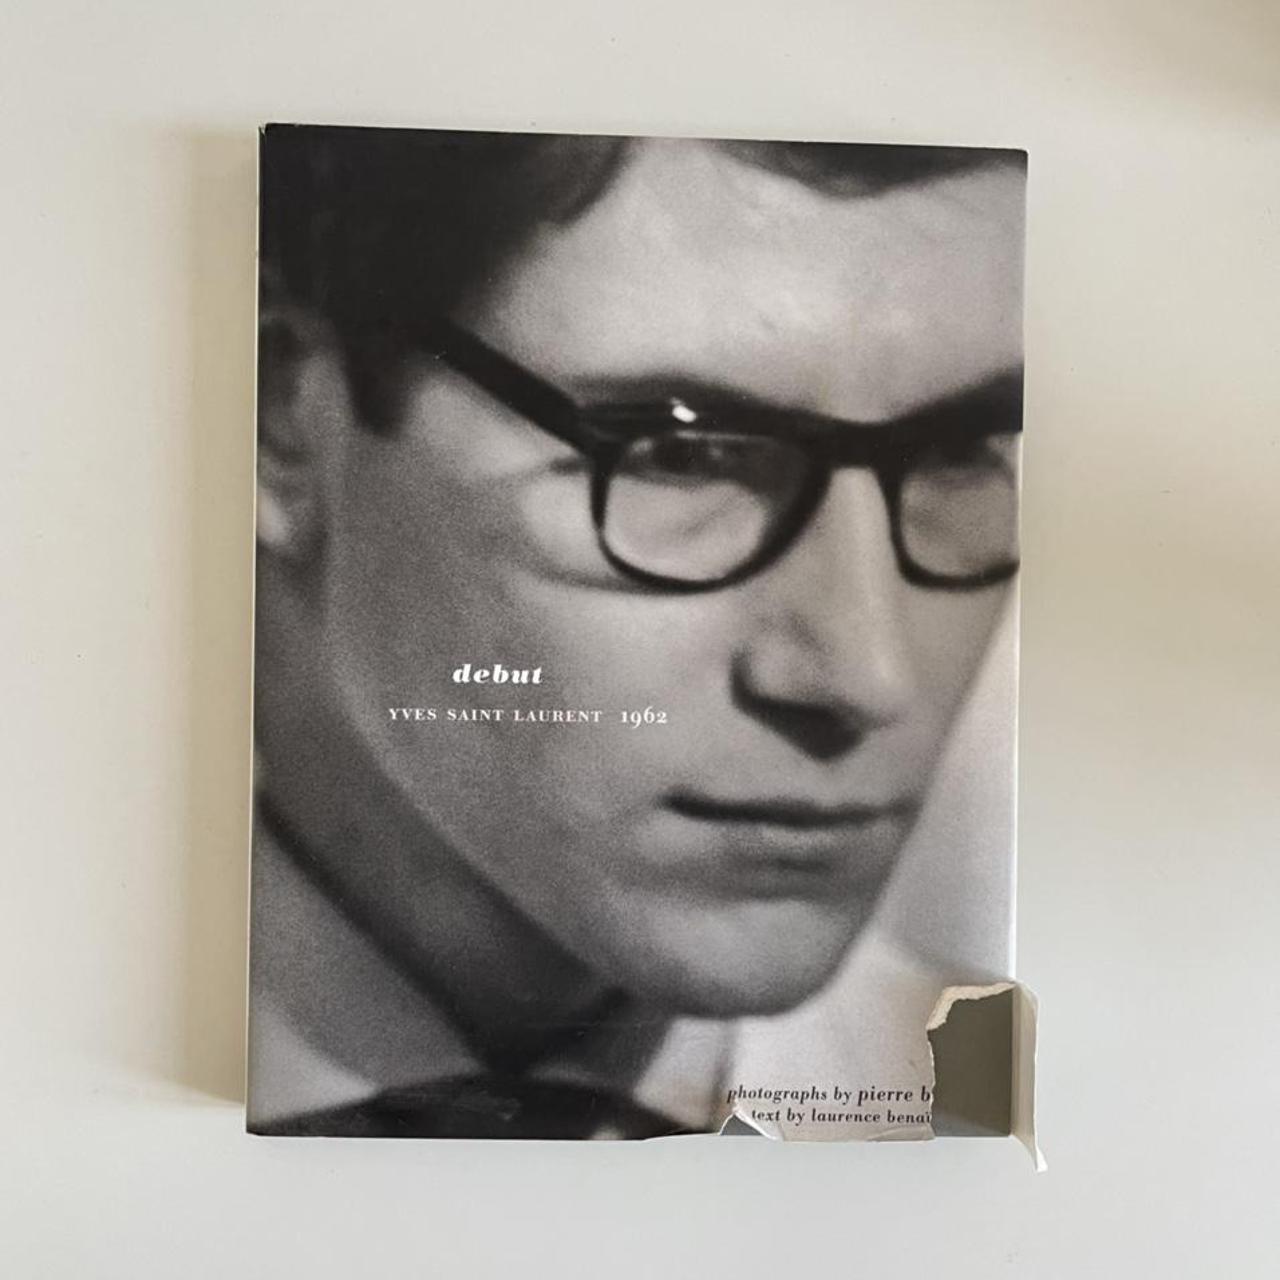 Debut YVES SAINT LAURENT 1962 book. gifted from the... - Depop